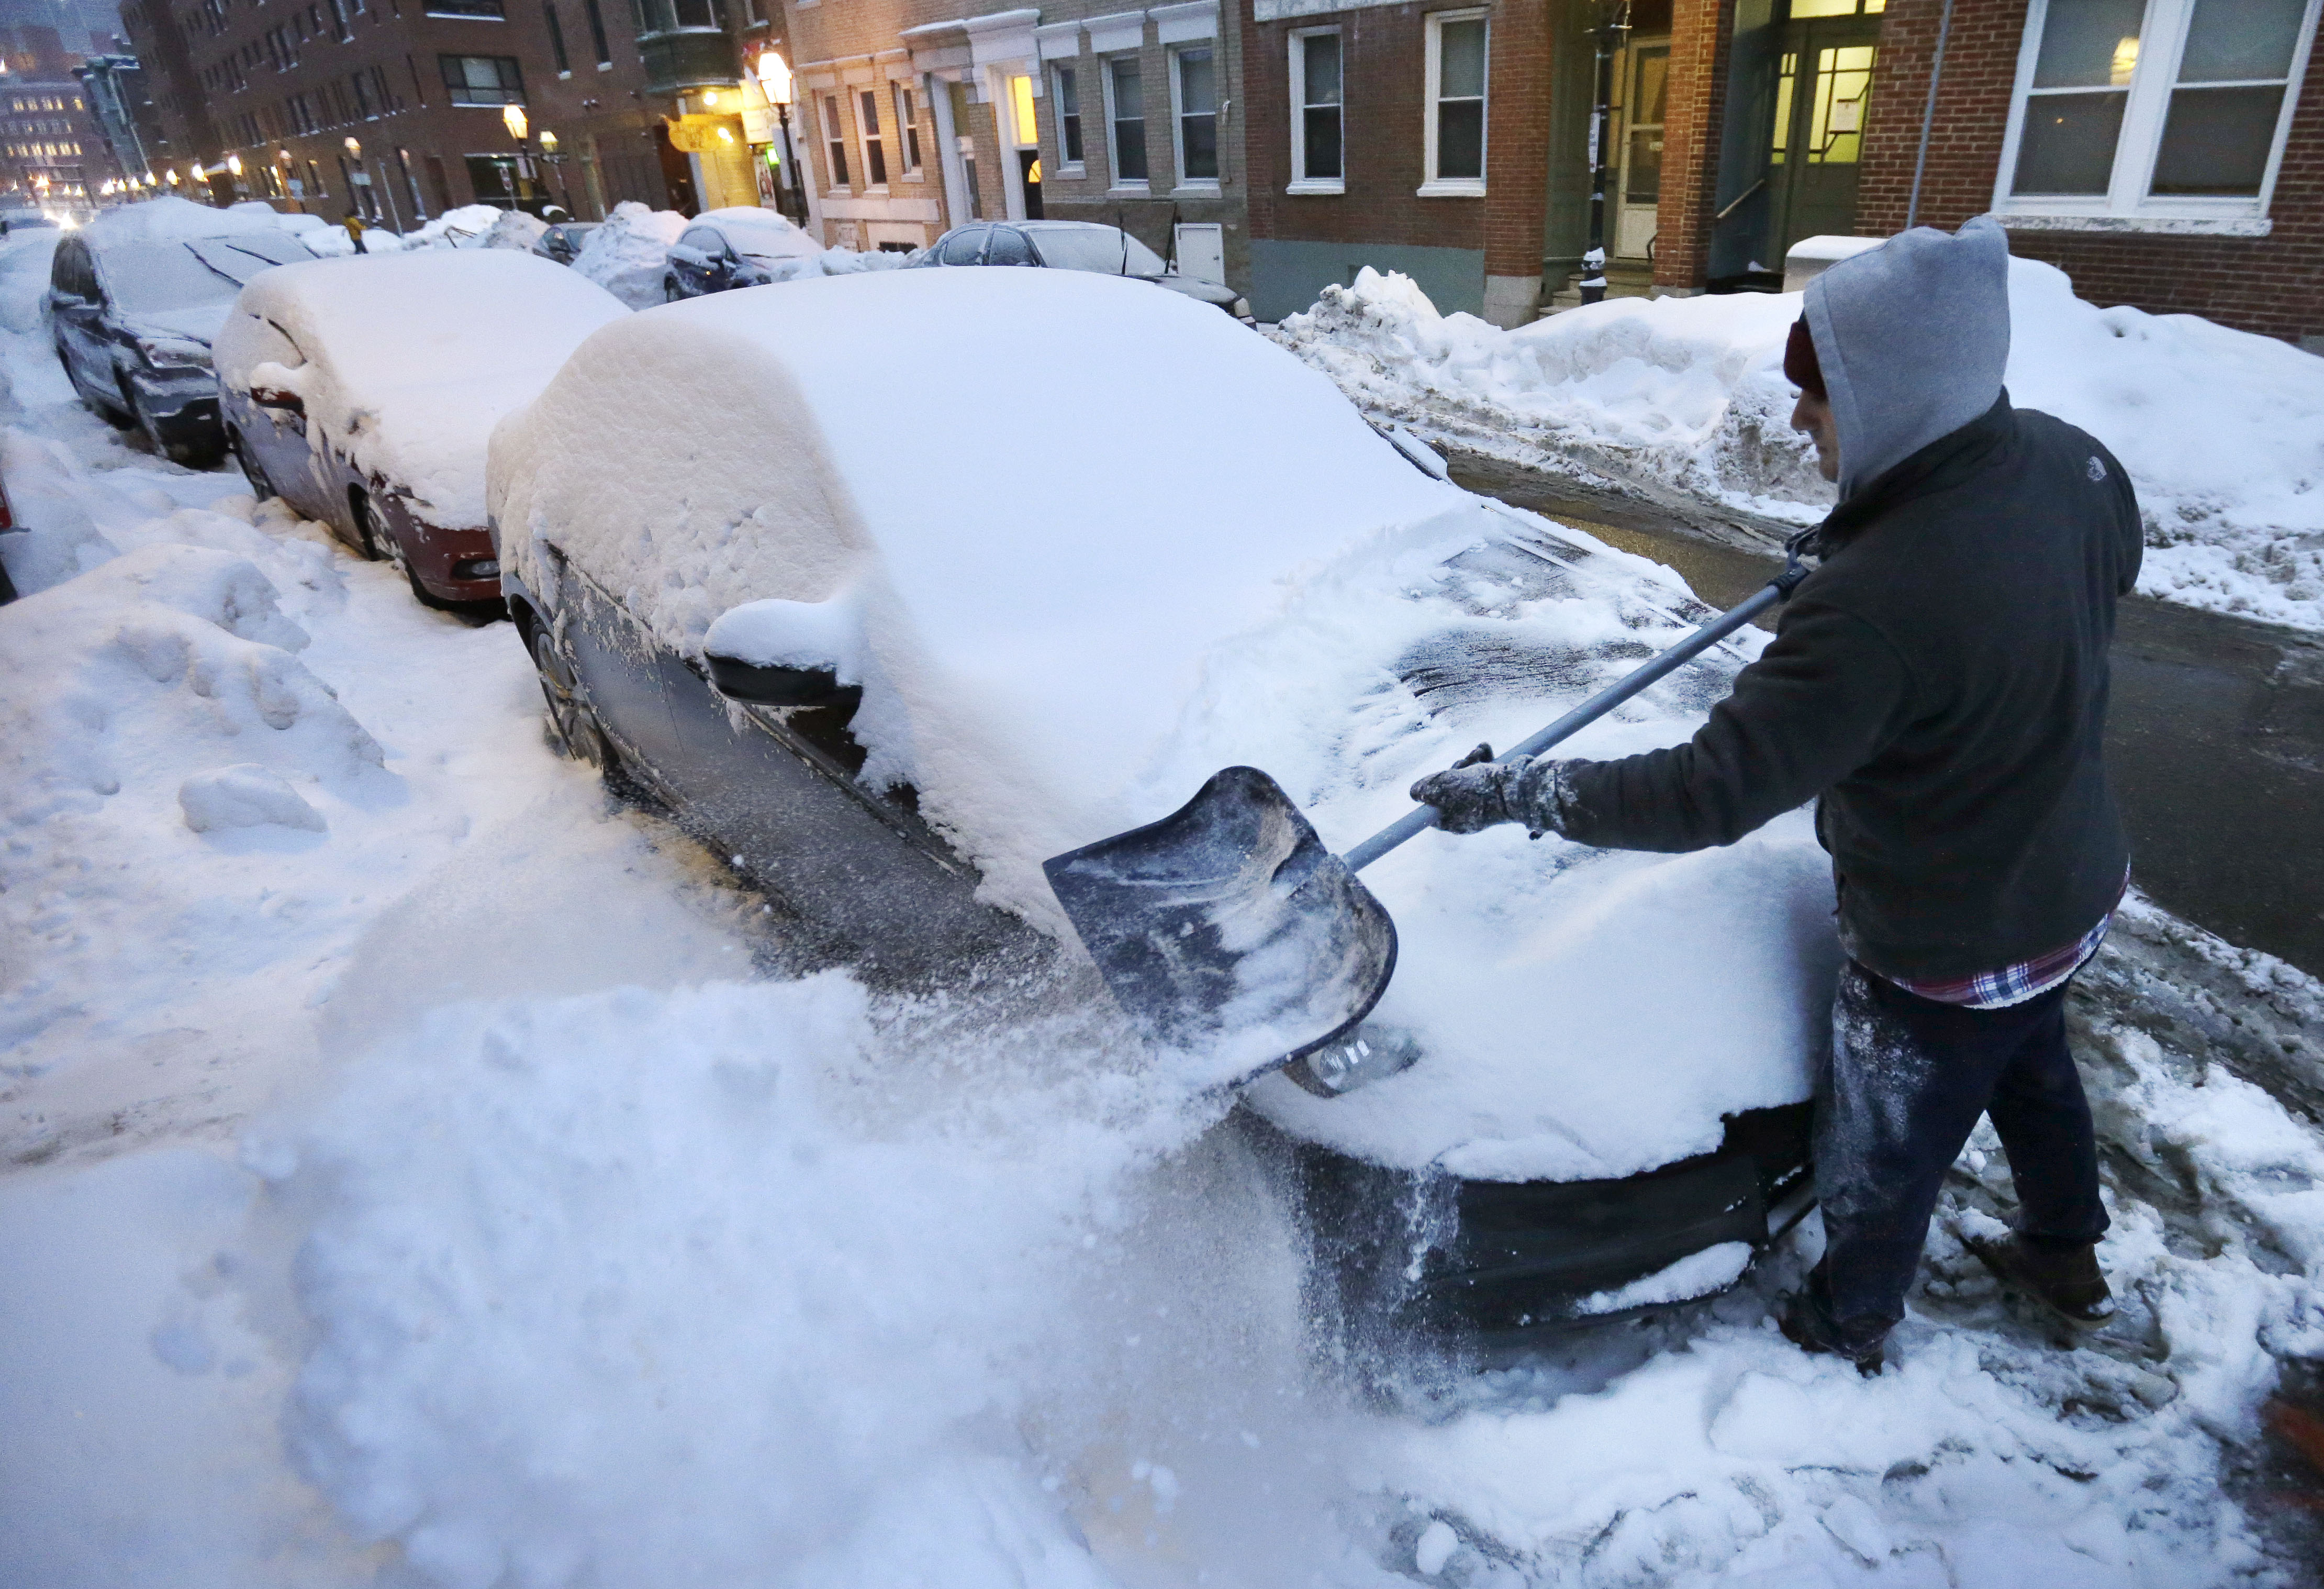 Snow storm hits New England again, emergency declared in Mass. CBS News